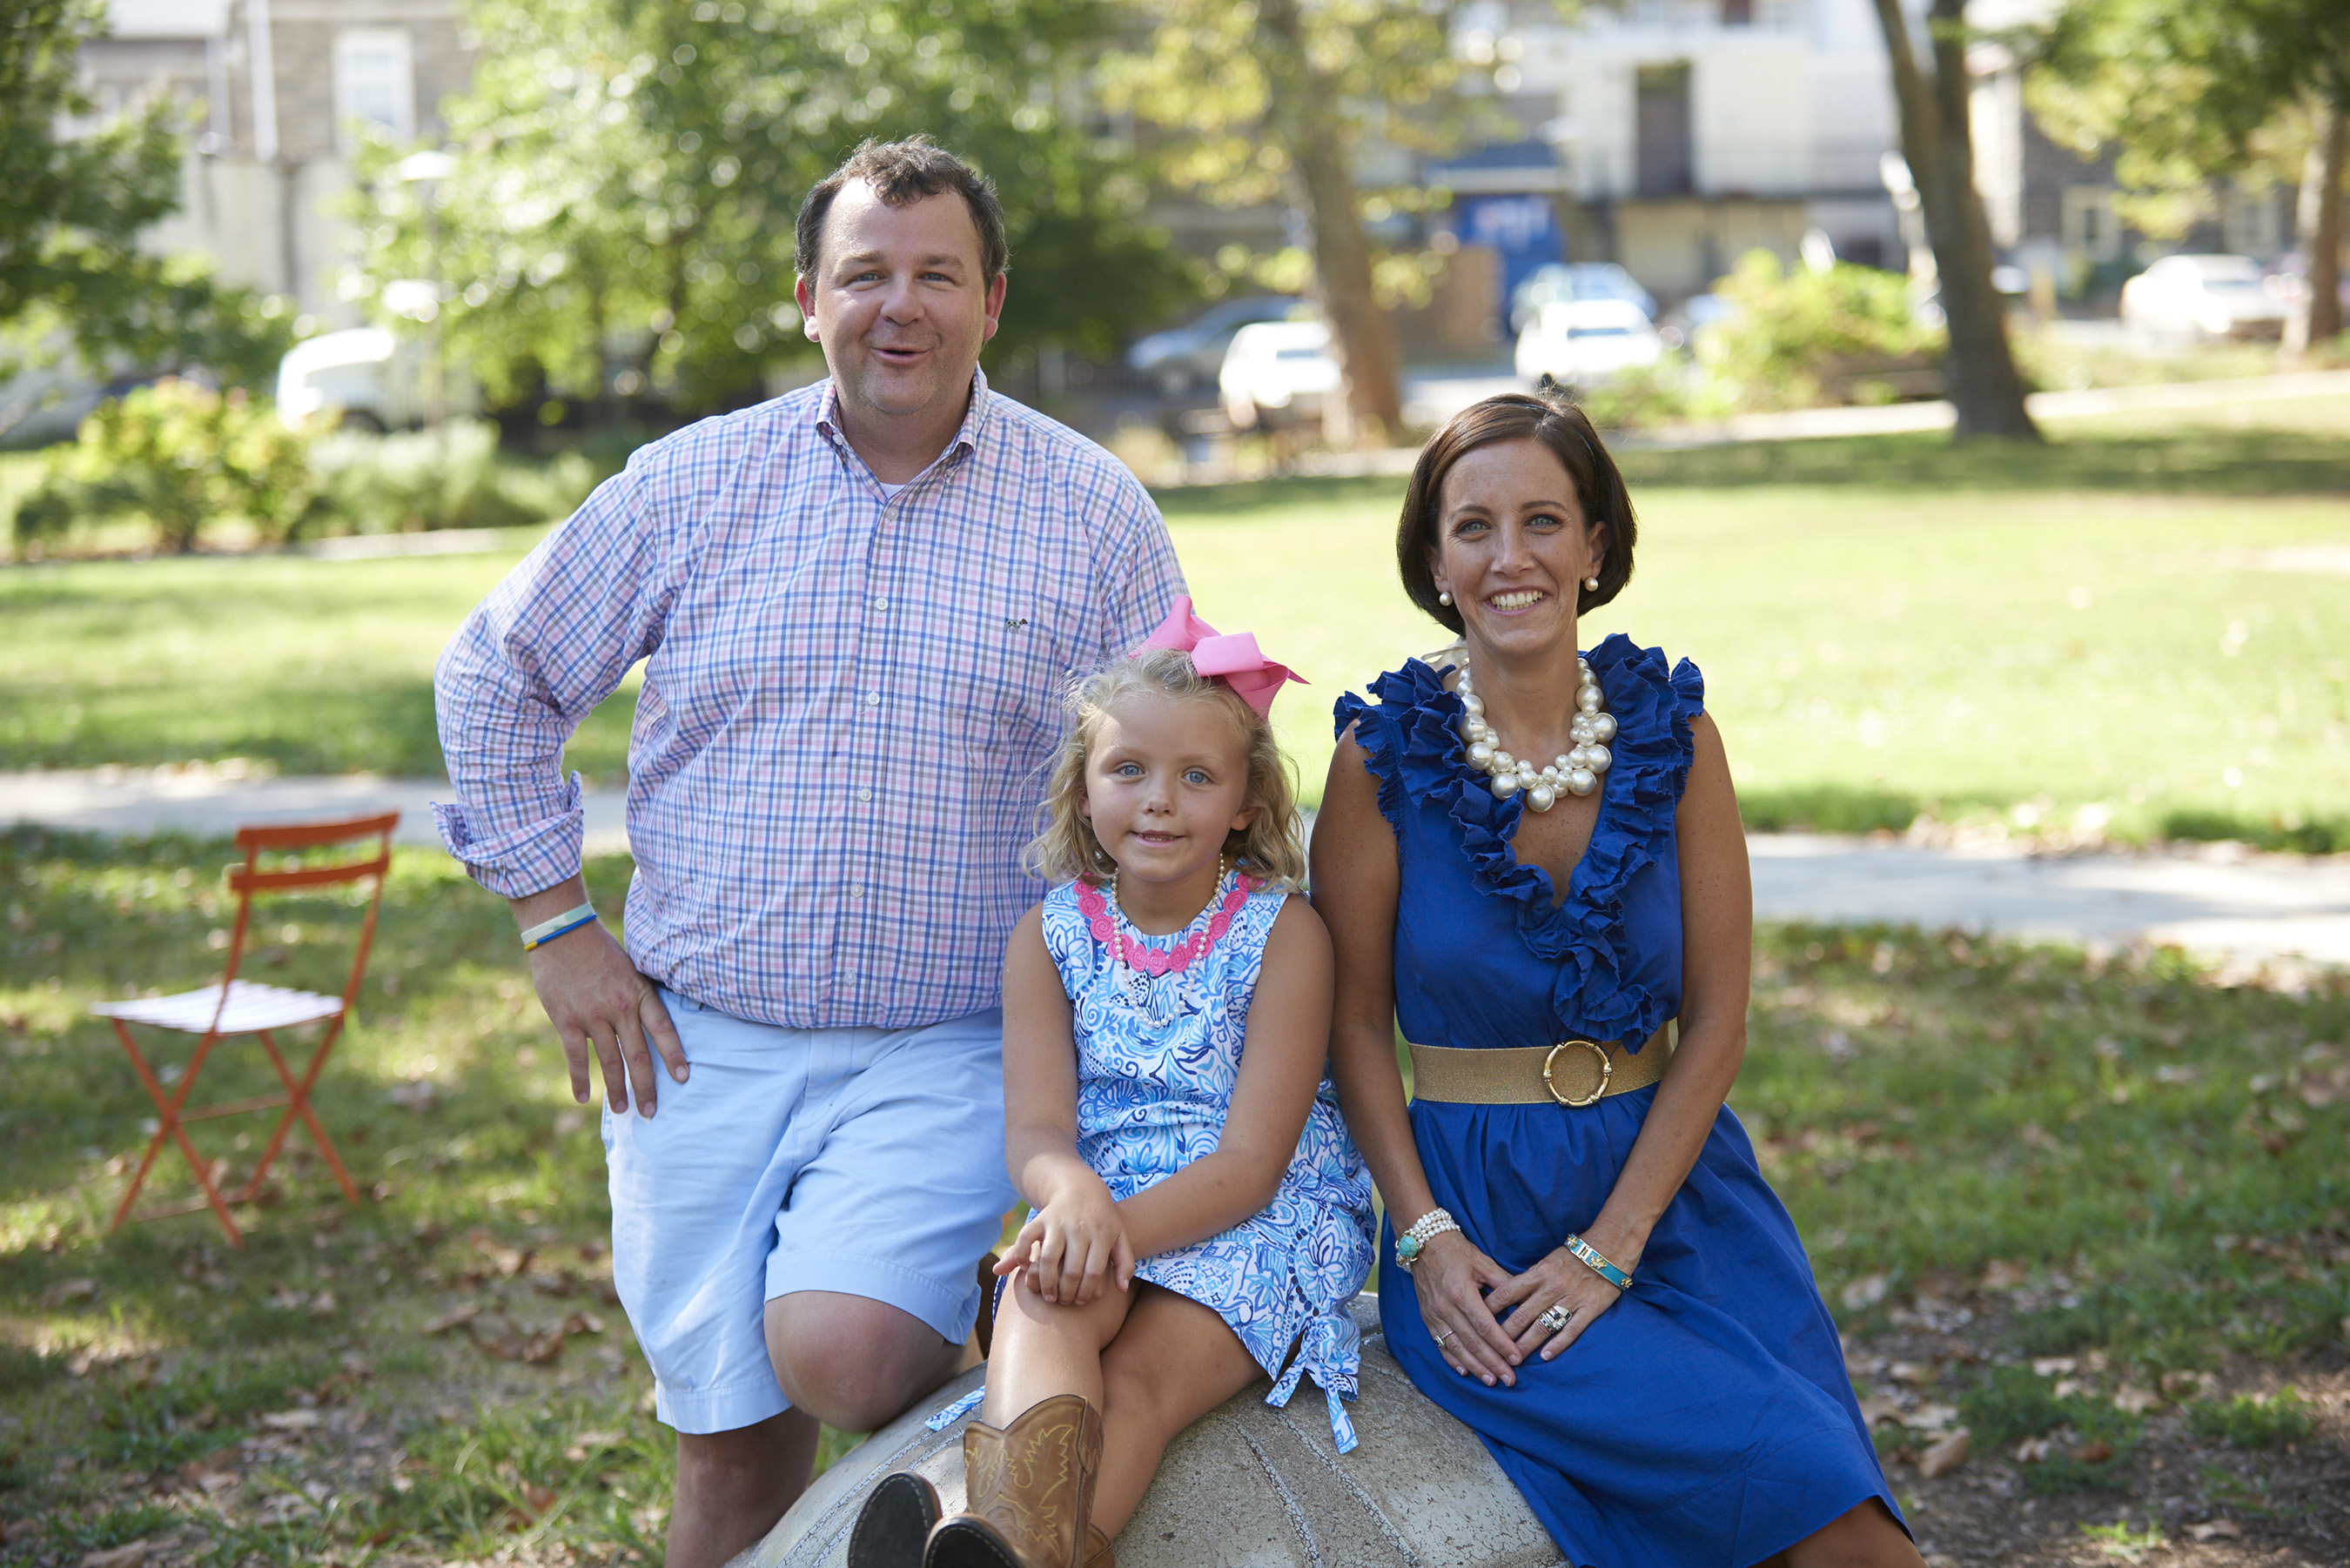 Edie Gilger’s cancer journey and how research saves lives is an inspiration. Northwestern Mutual is celebrating the five-year anniversary of its Childhood Cancer Program, which funds family support and critical research.